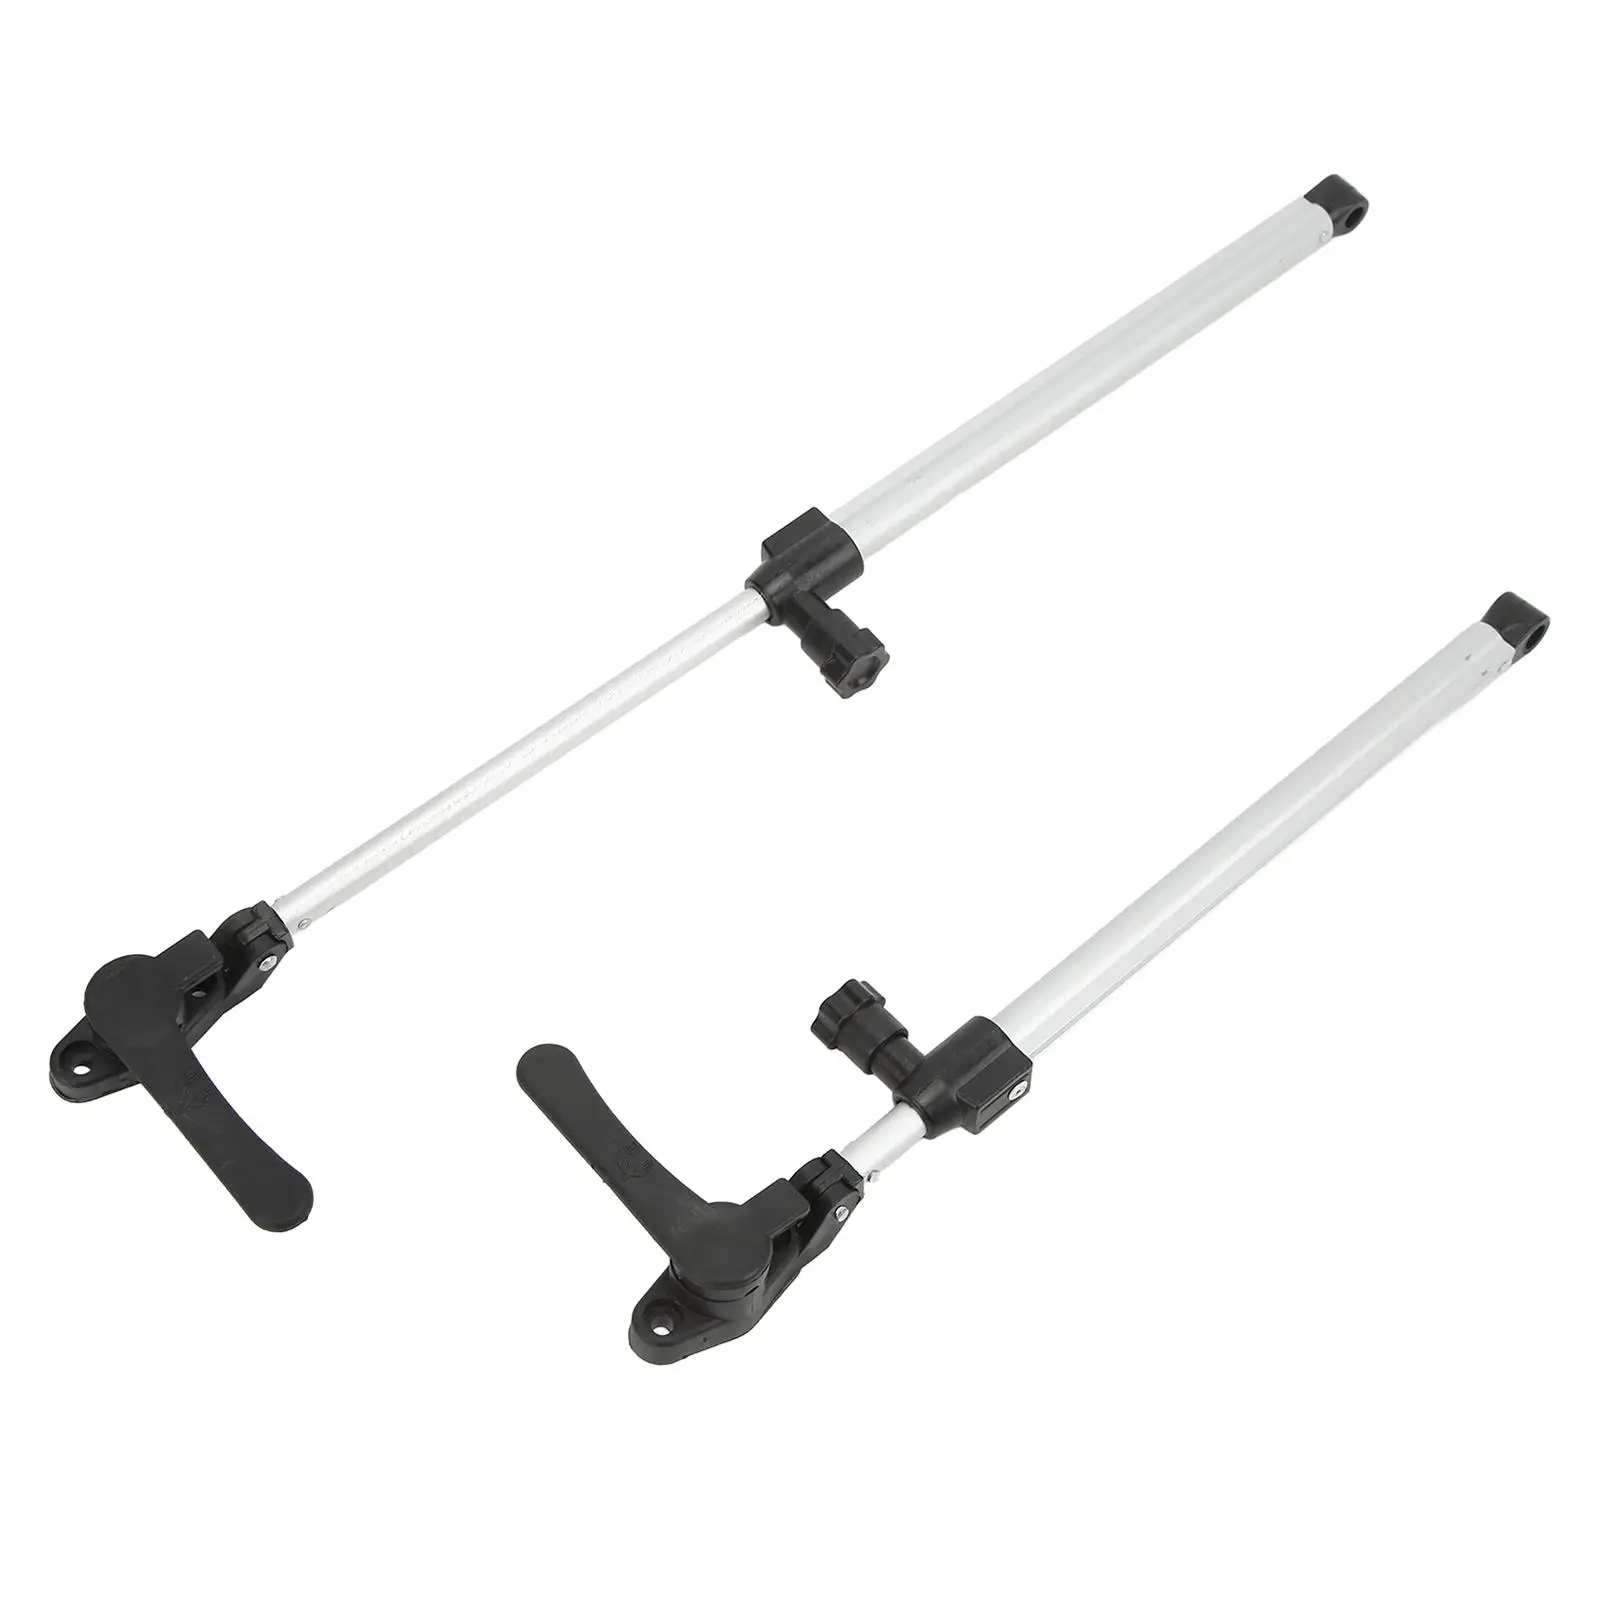 2Pcs RV Window Support Rod Telescopic Arm for Trailer Camper